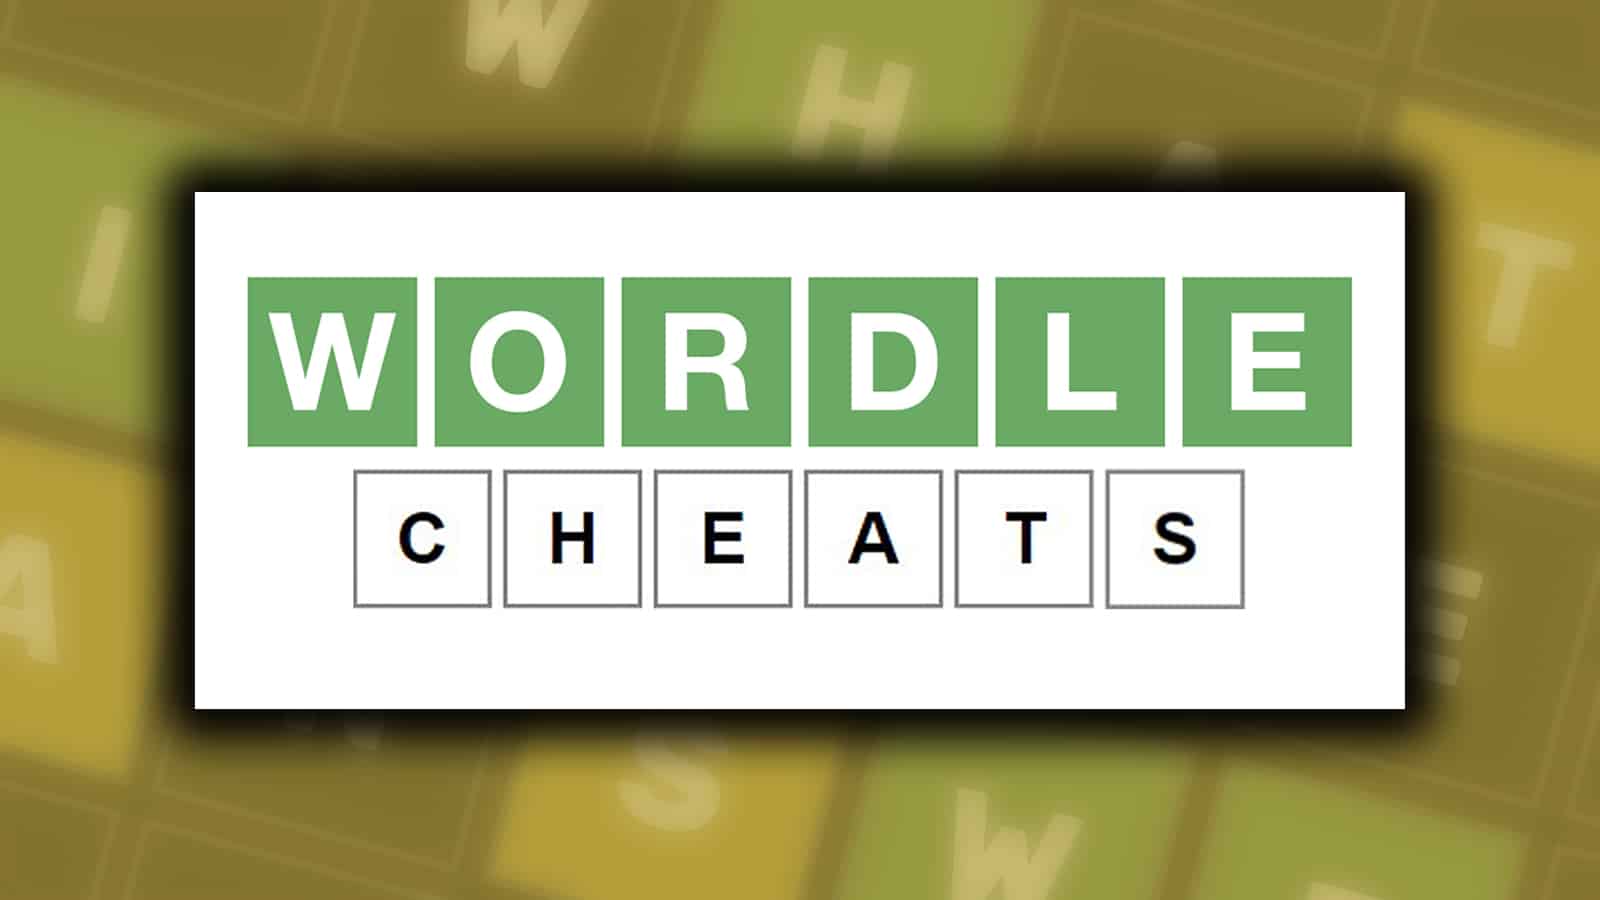 How to cheat at Wordle